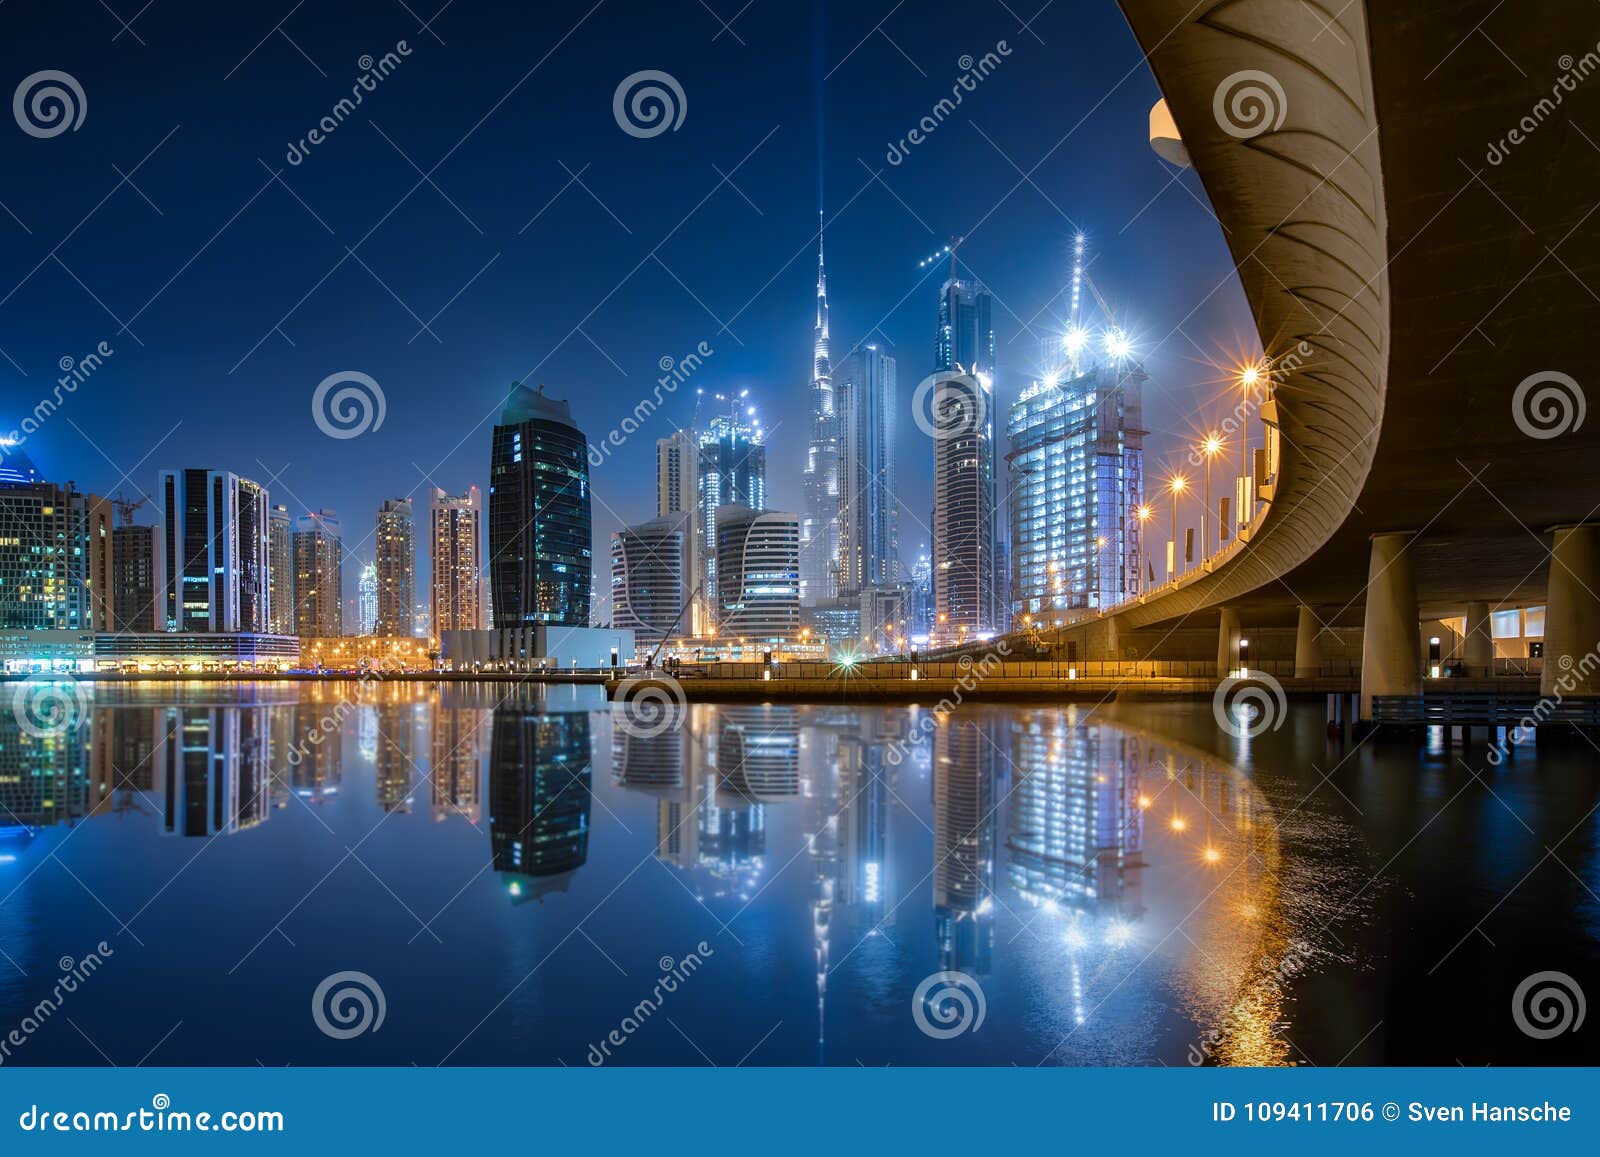 the business bay in dubai during night